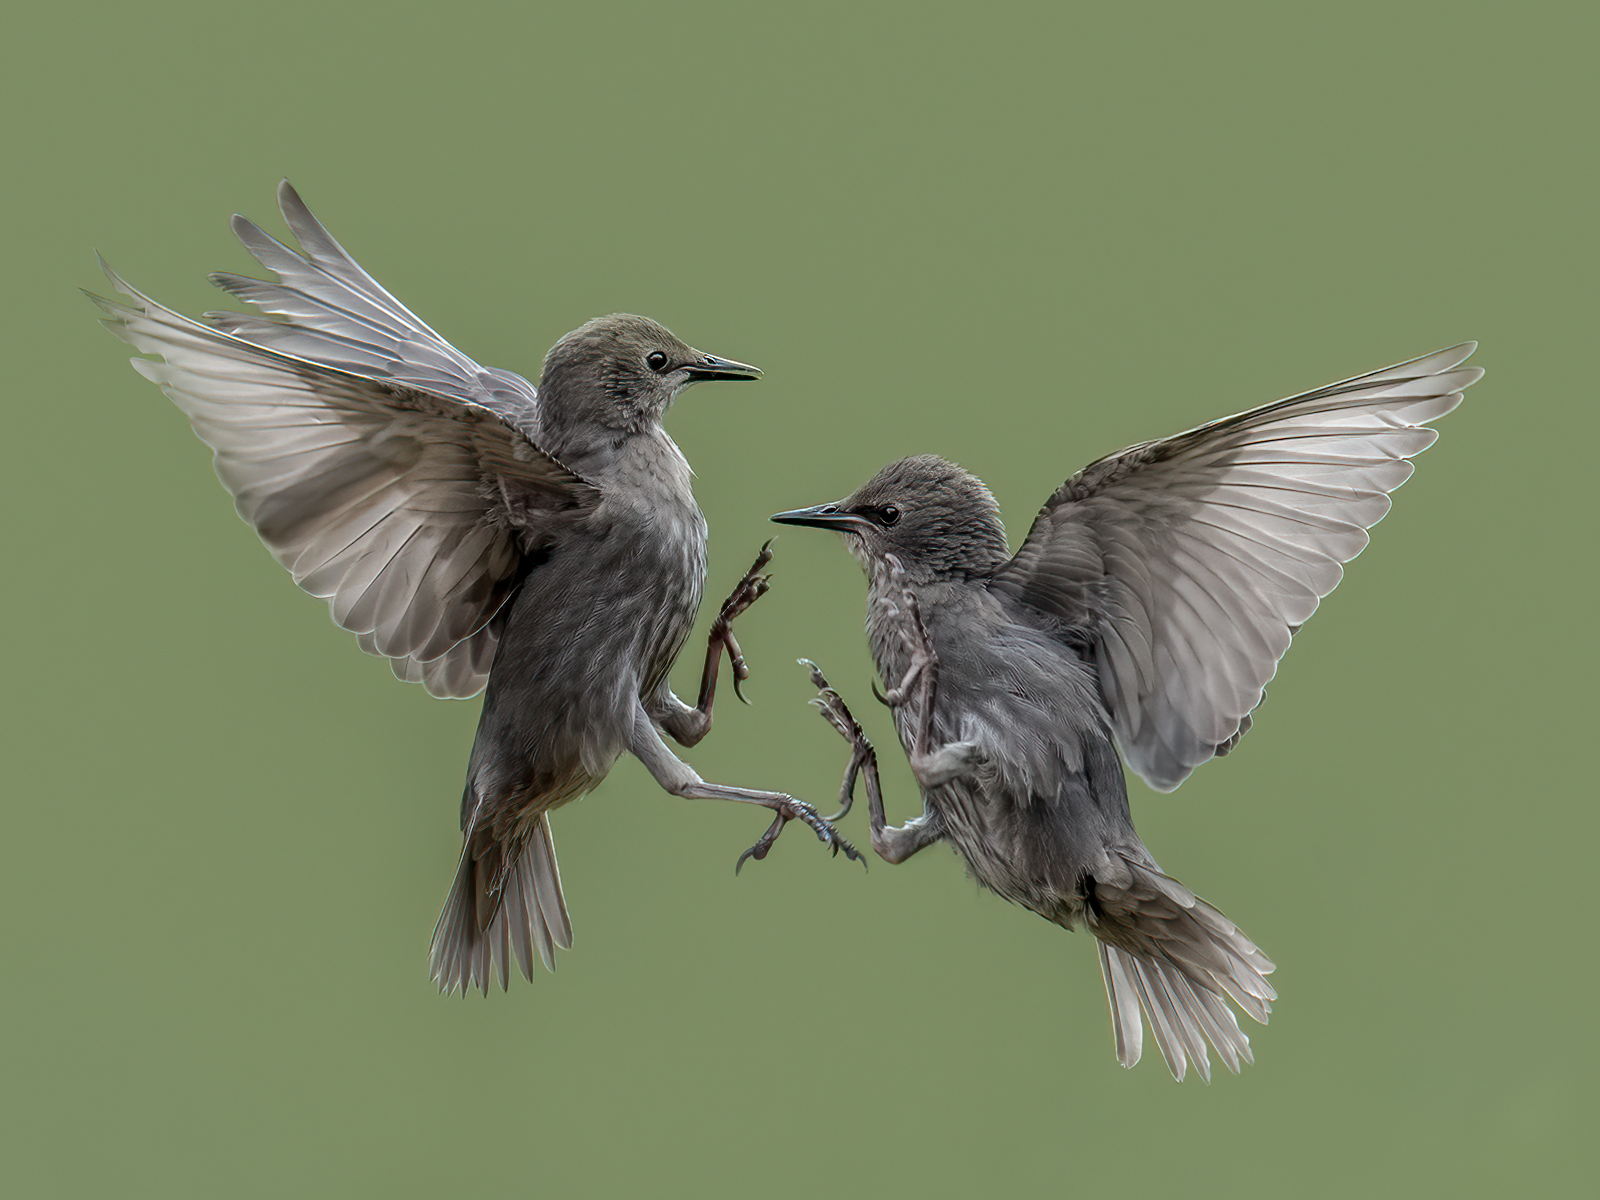 Juvenile Starling Battle - Phillip Barber FBPE MPAGB - PAGB Gold Medal